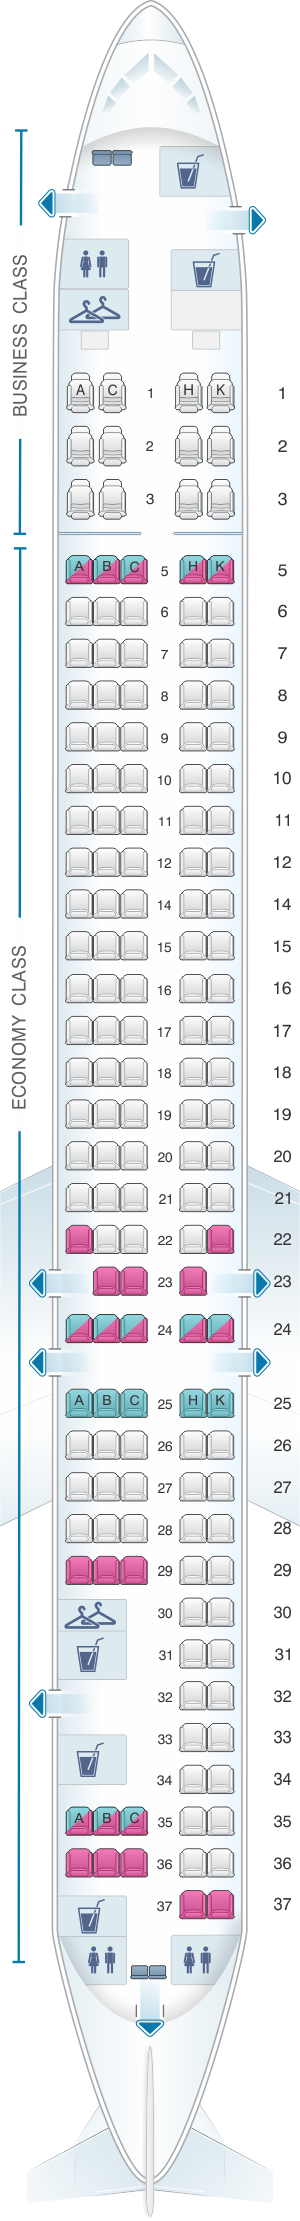 Seat map for EVA Air McDonnell Douglas MD 90